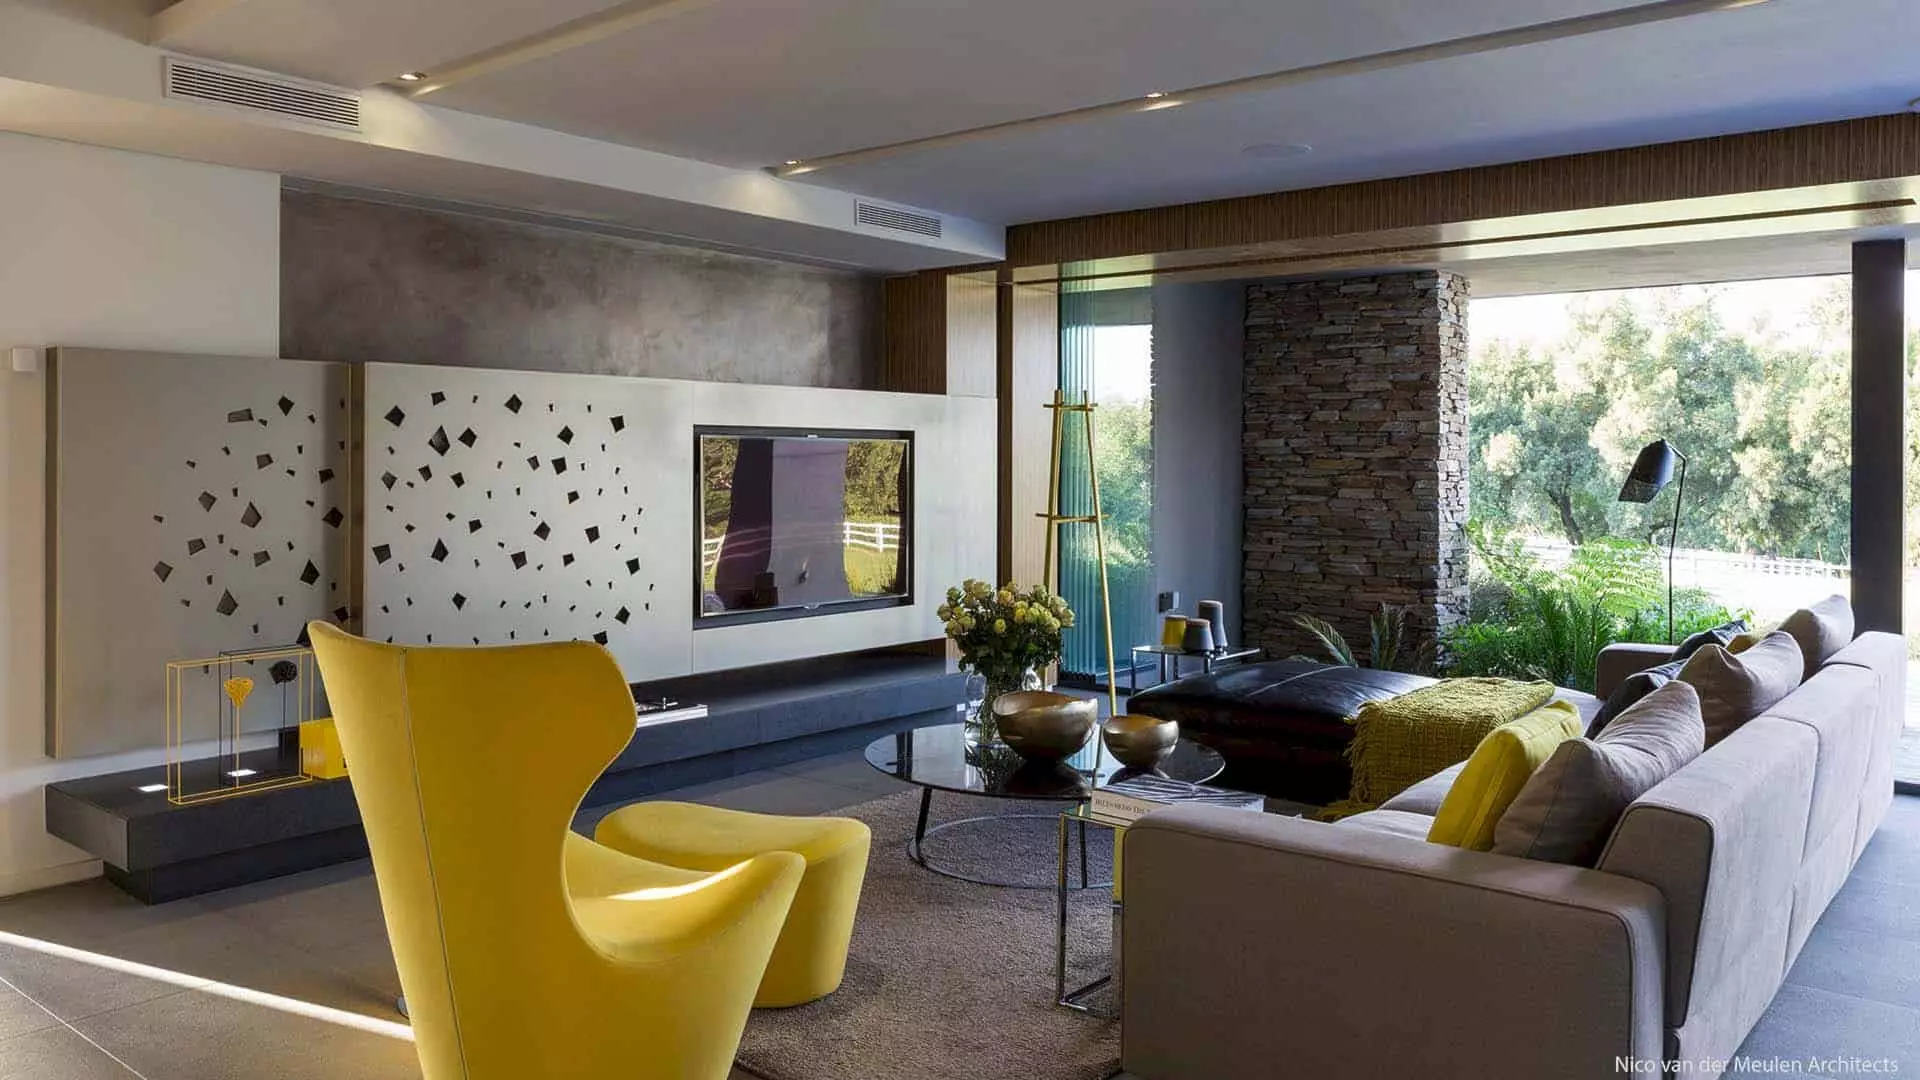 10 Best Contemporary Living Room Ideas With Modern Minimalist Fireplace